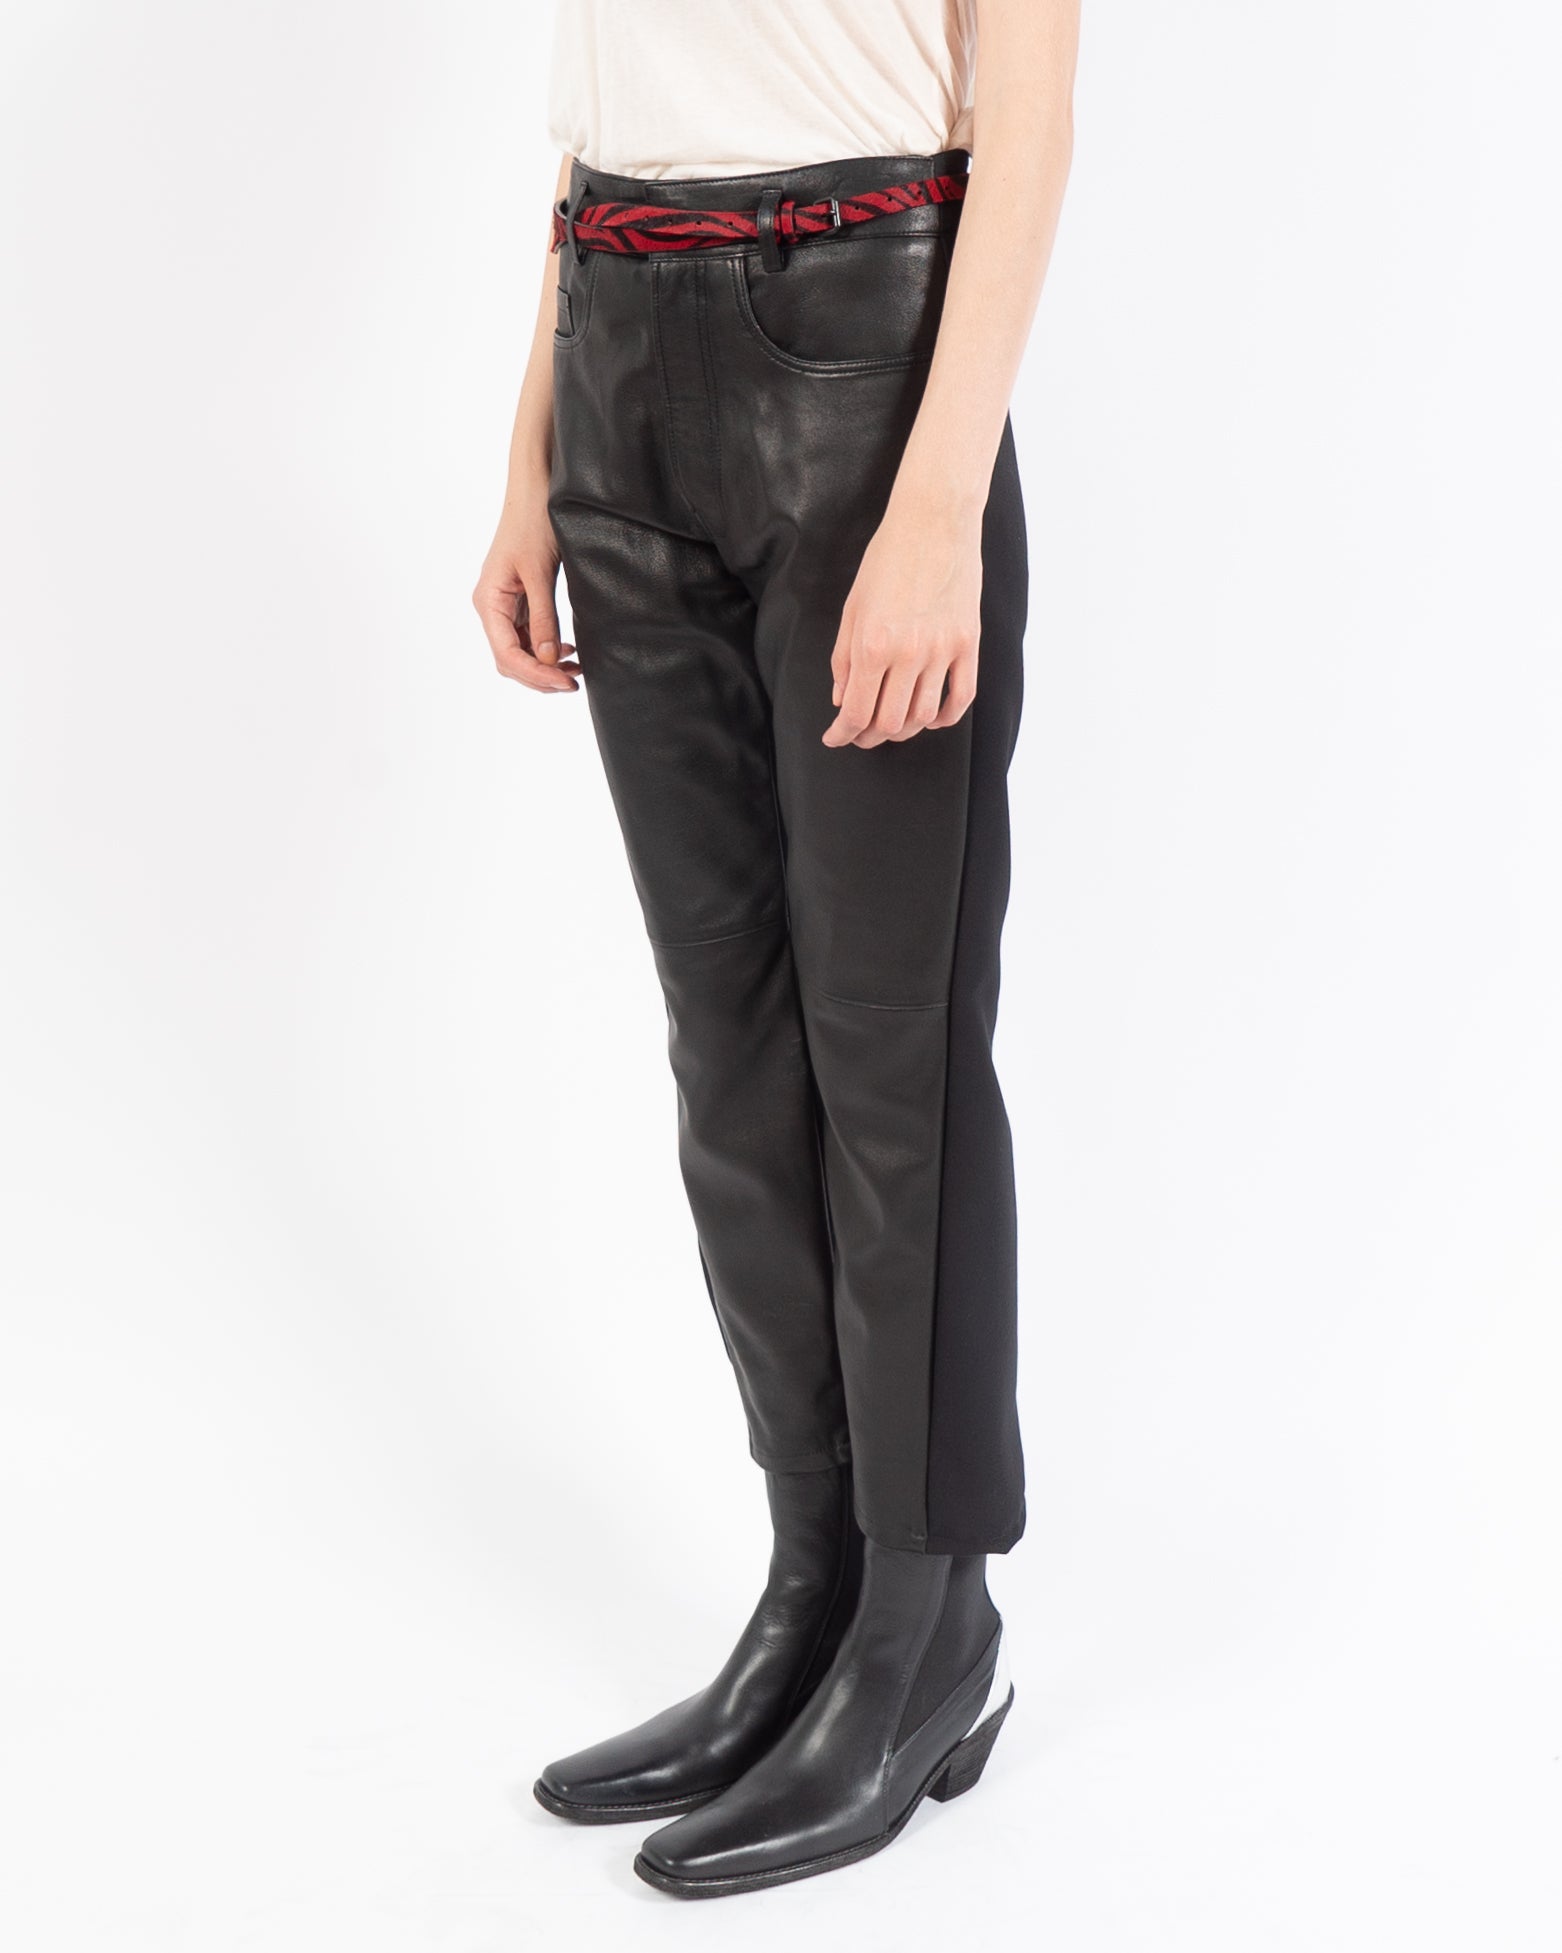 FW19 Leather Two-Tone Trousers